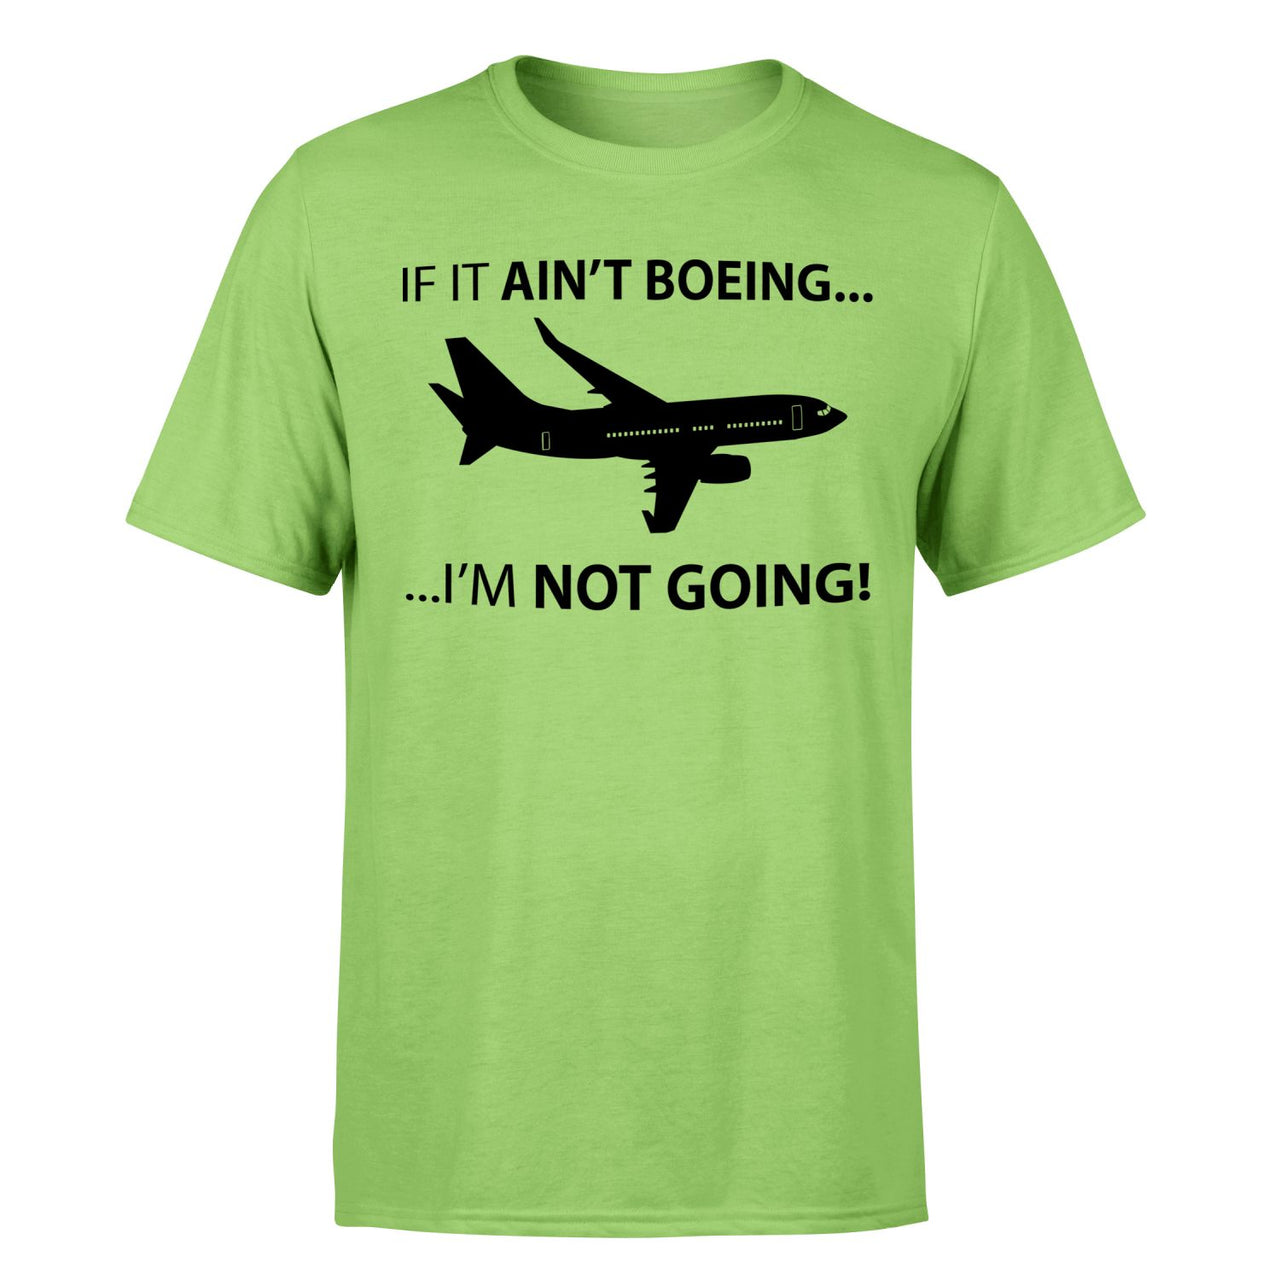 If It Ain't Boeing I'm Not Going! Designed T-Shirts